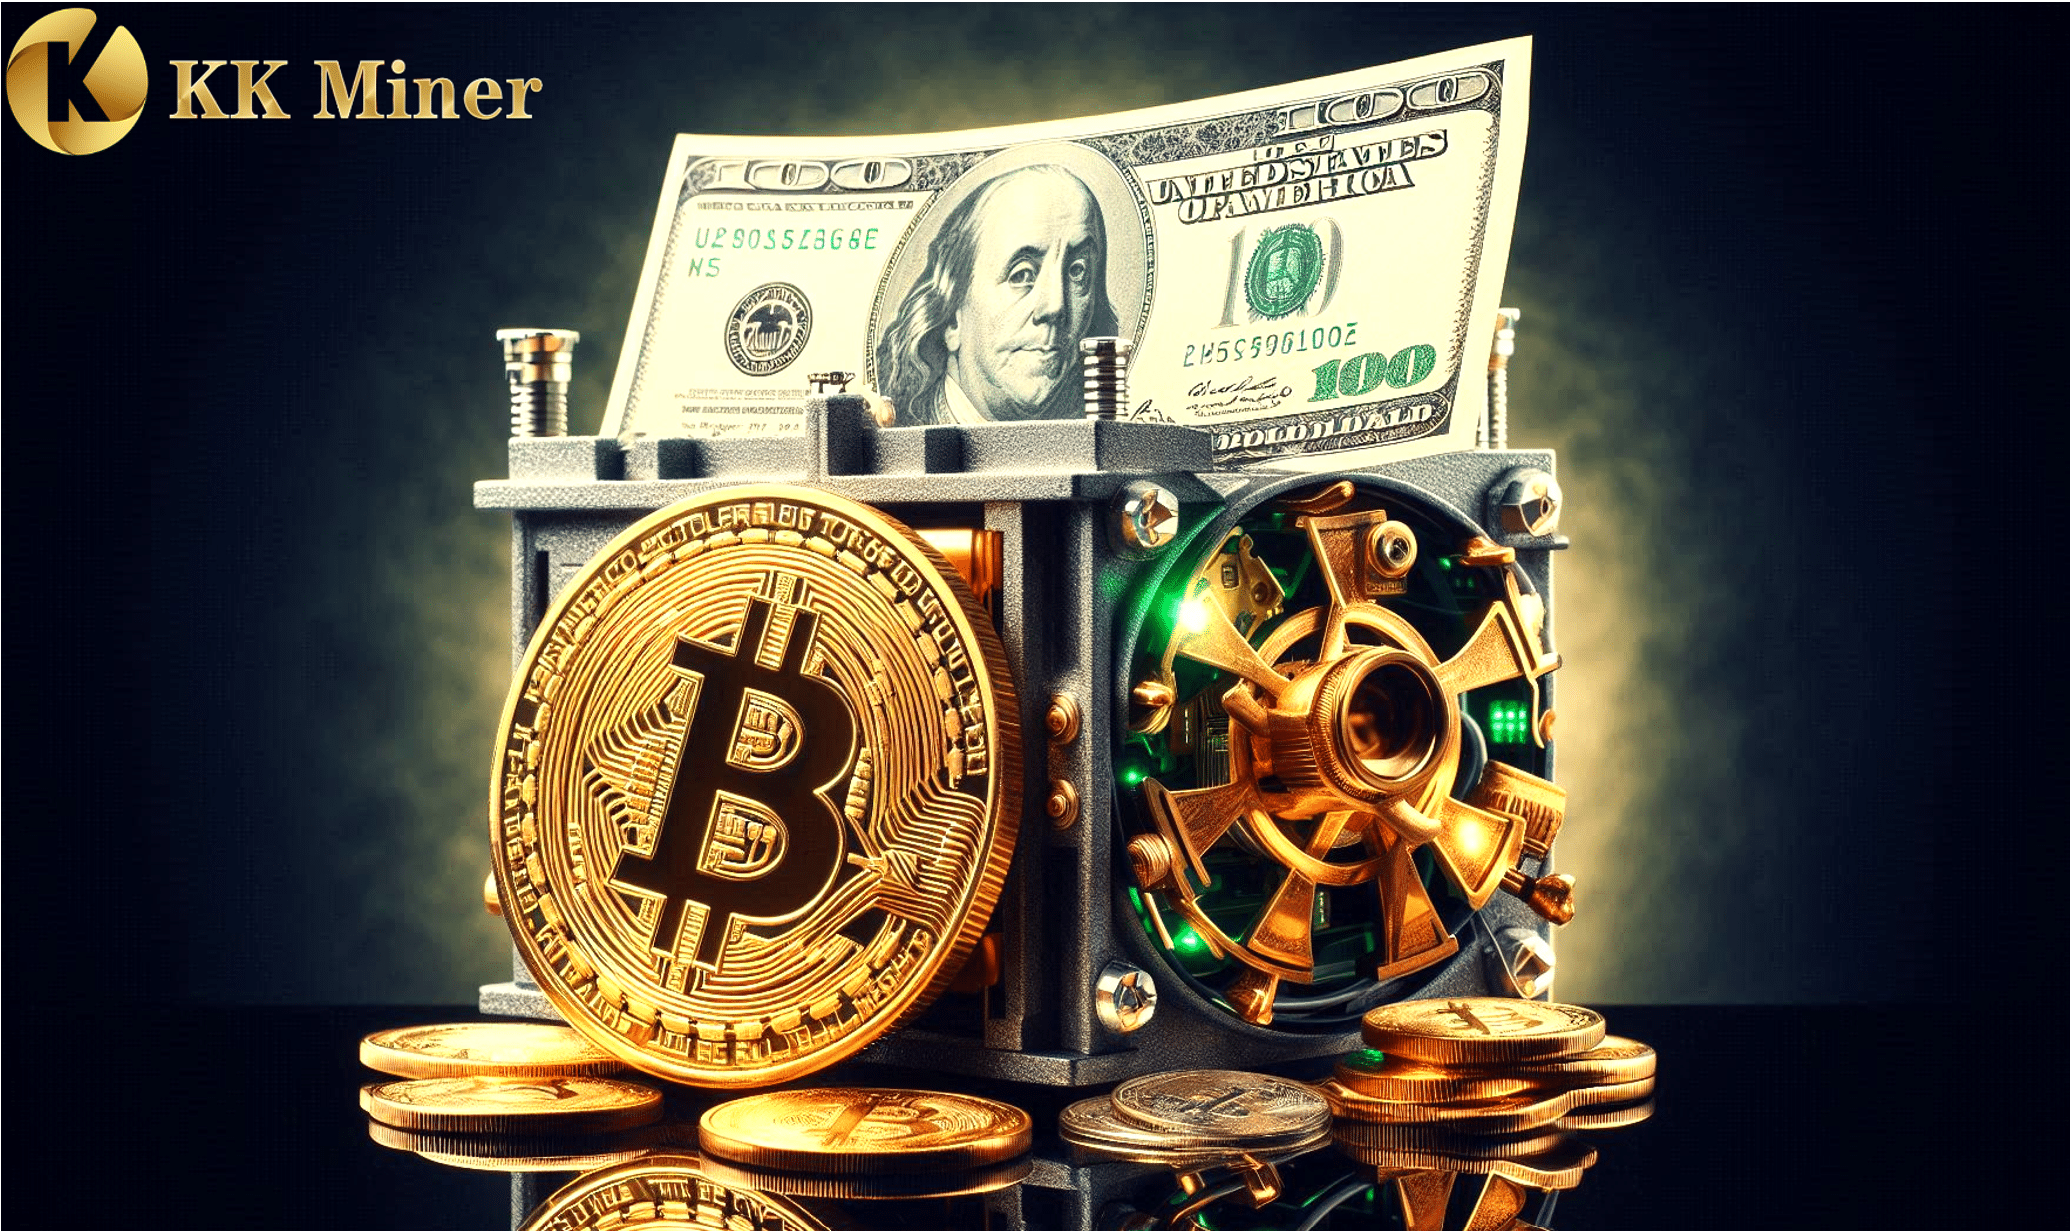 KK Miner's cloud mining contracts promise investors 0 in BTC daily - 1